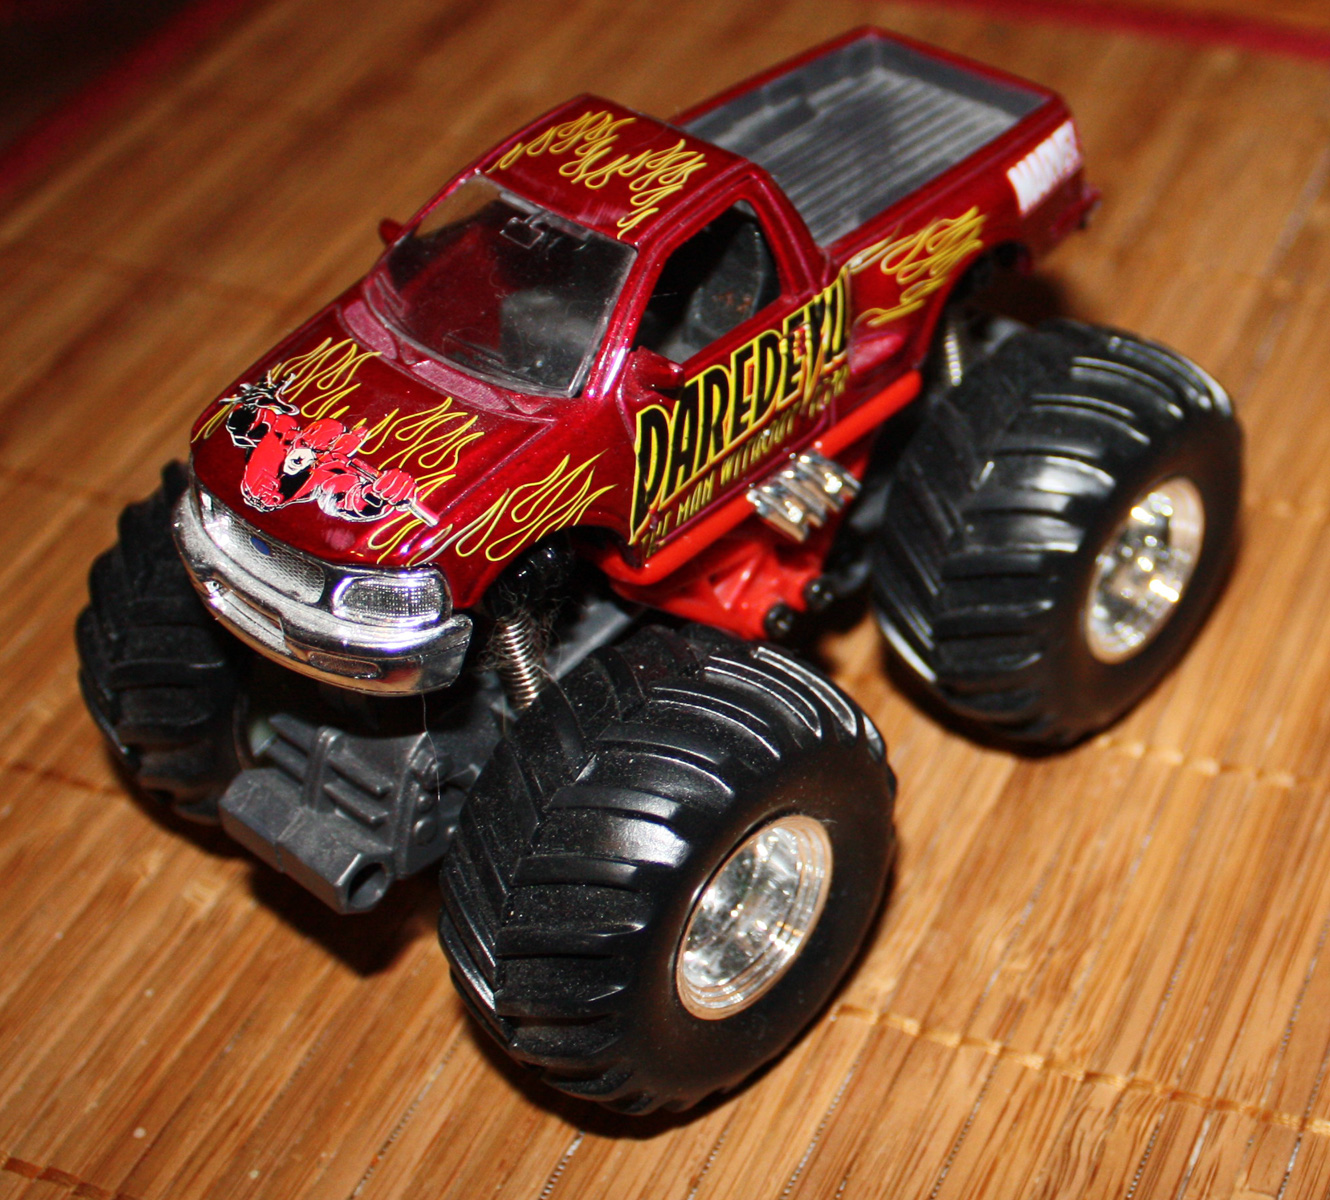 Because Monster Trucks are